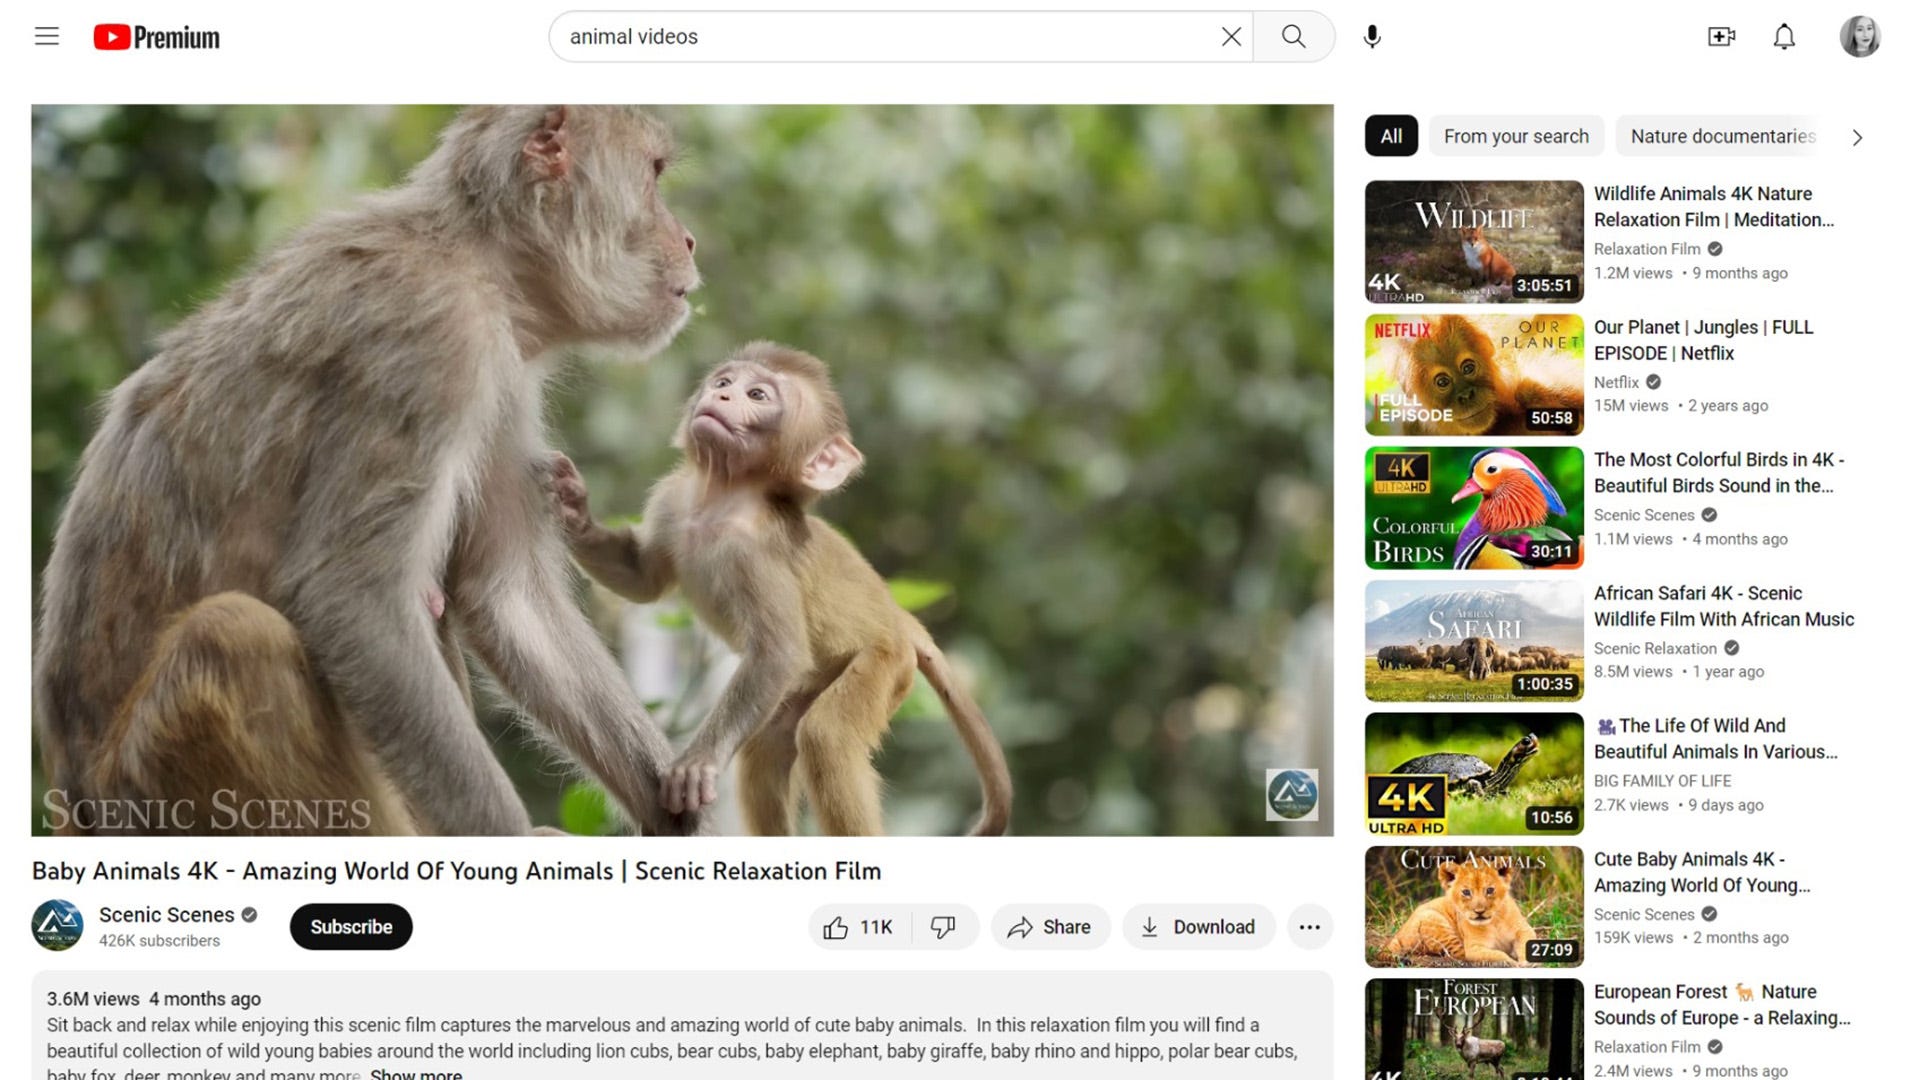 an image of a YouTube video with a monkey and its baby.